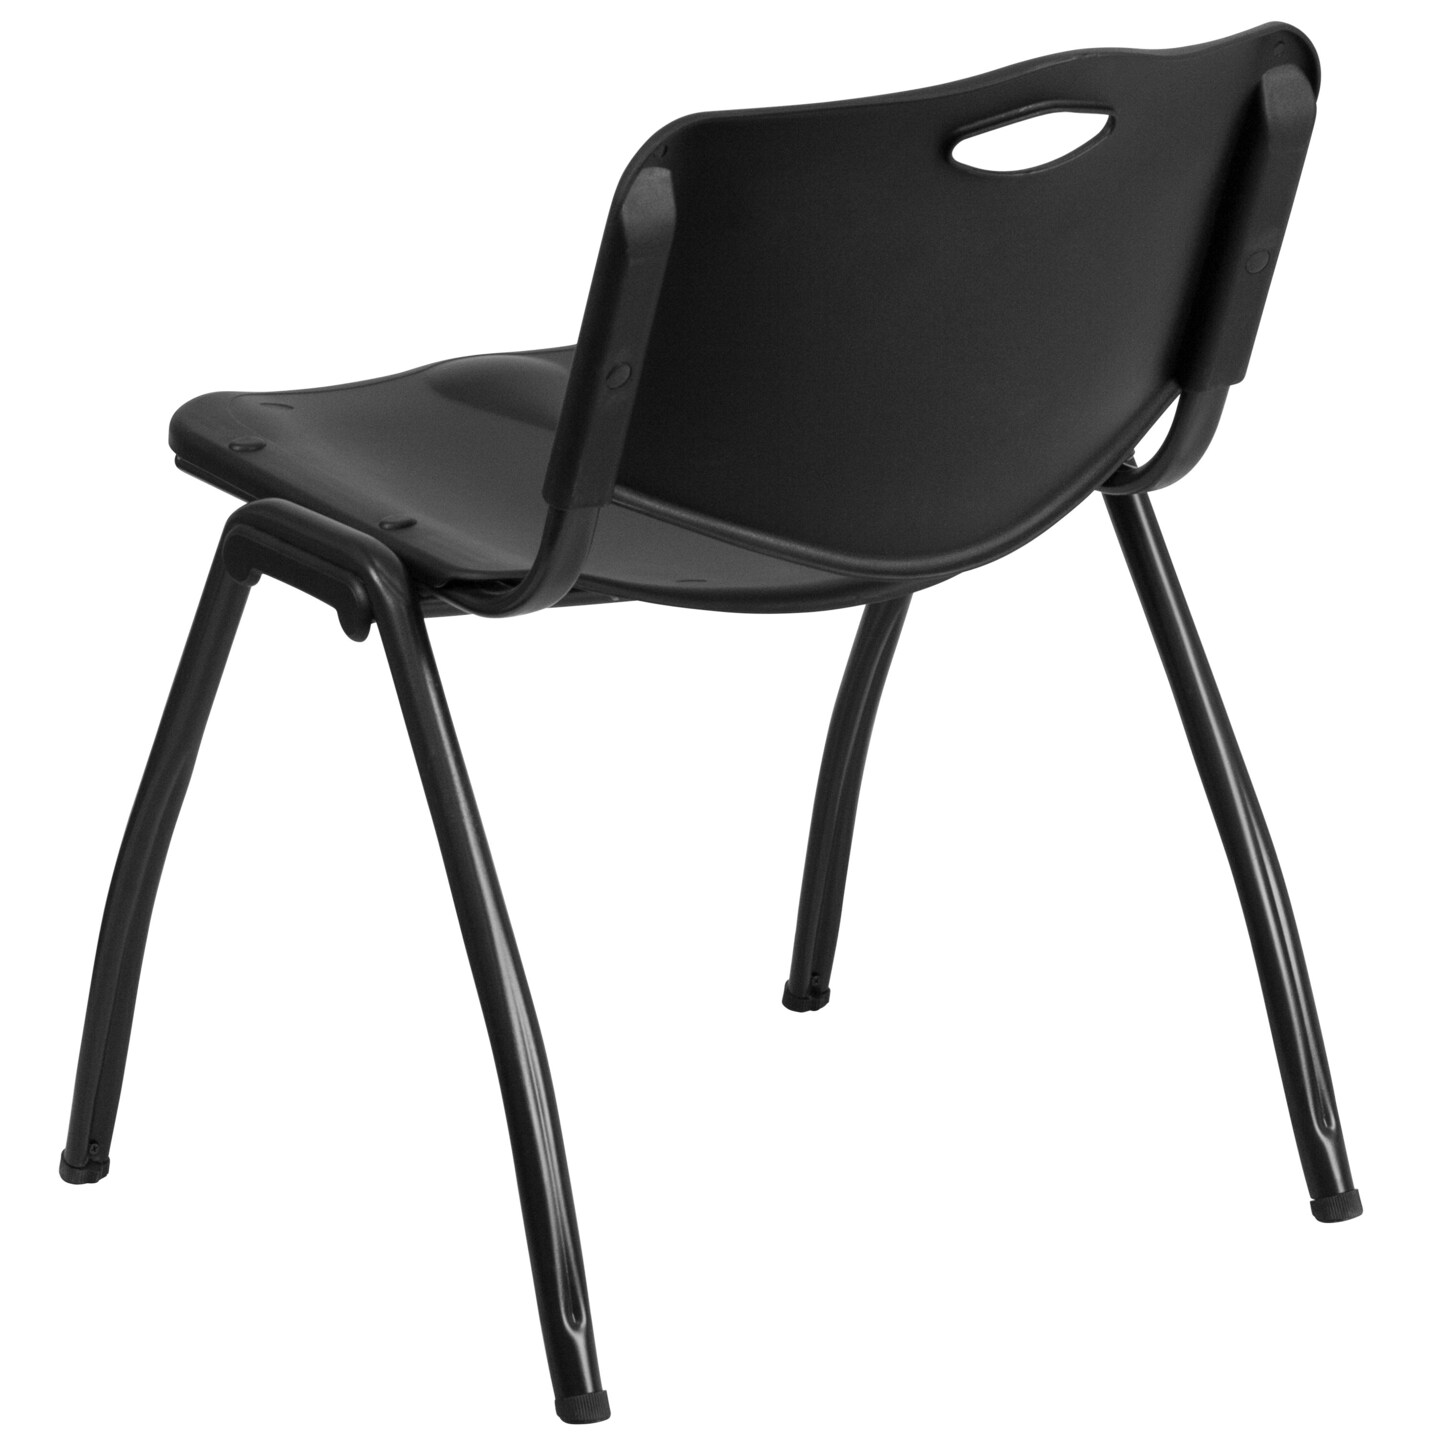 Emma and Oliver 880 lb. Capacity Plastic Stack Chair